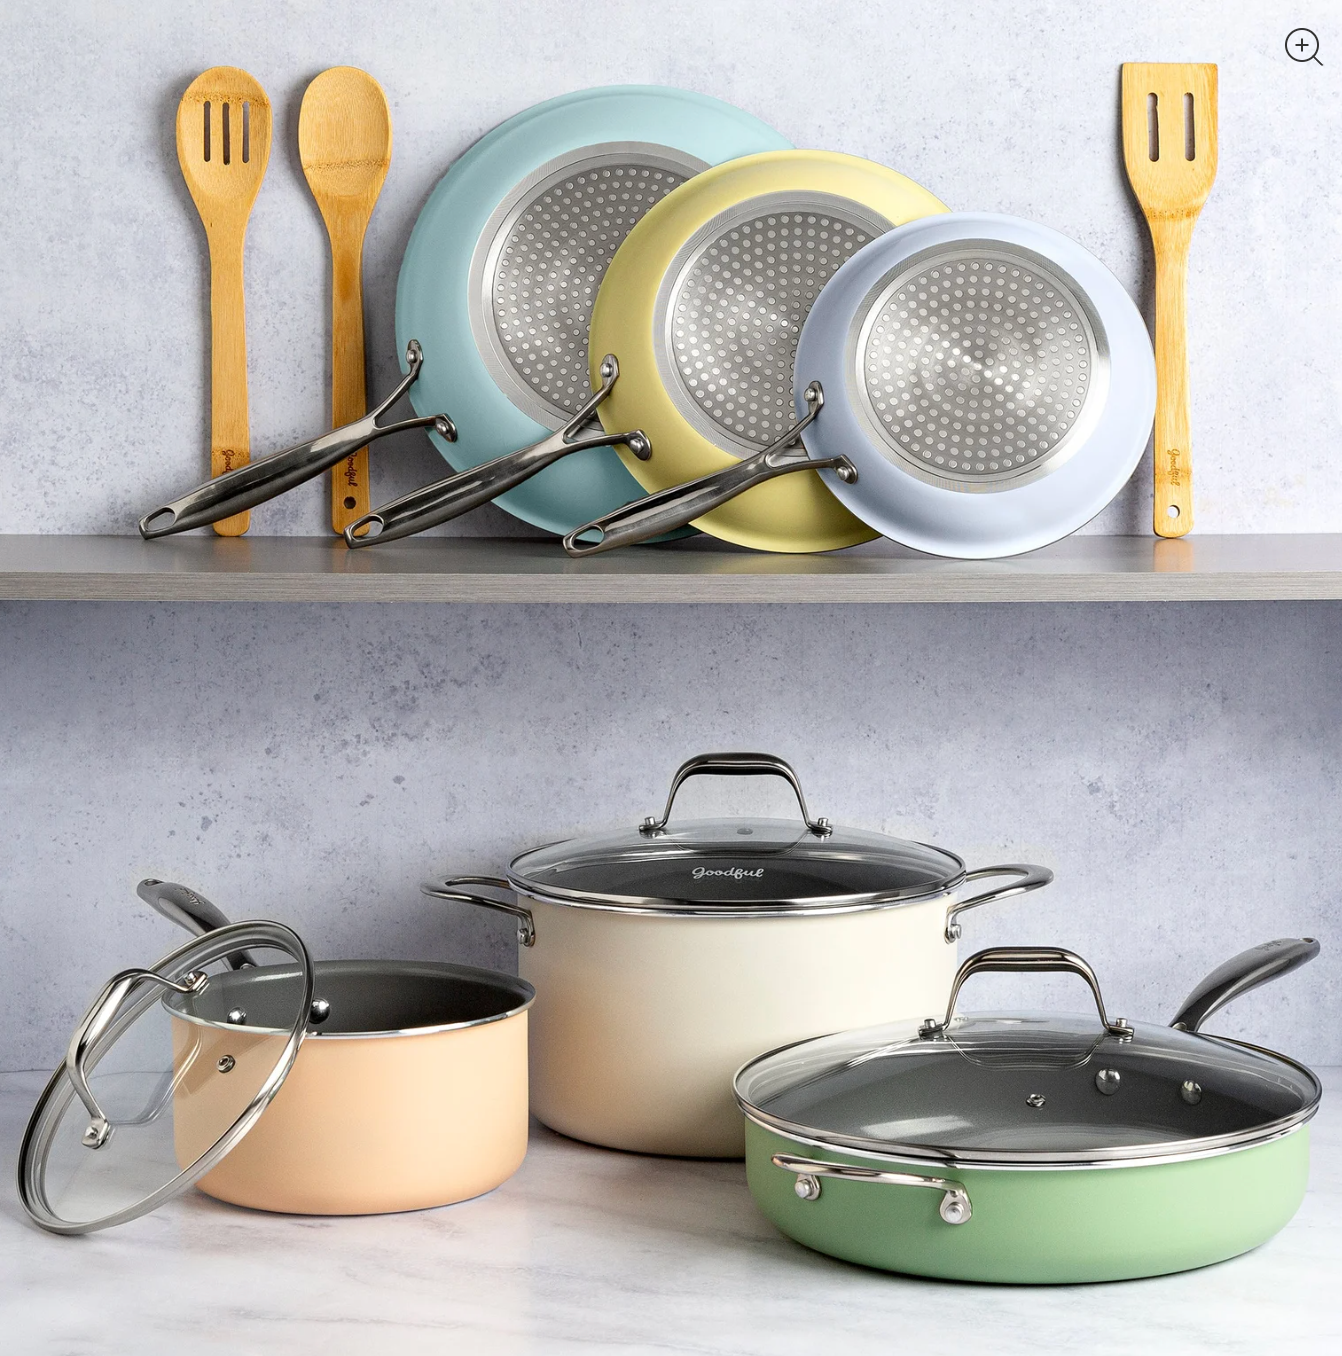 The cookware set with pots and pans in various pale pastel colors and clear handled lids 